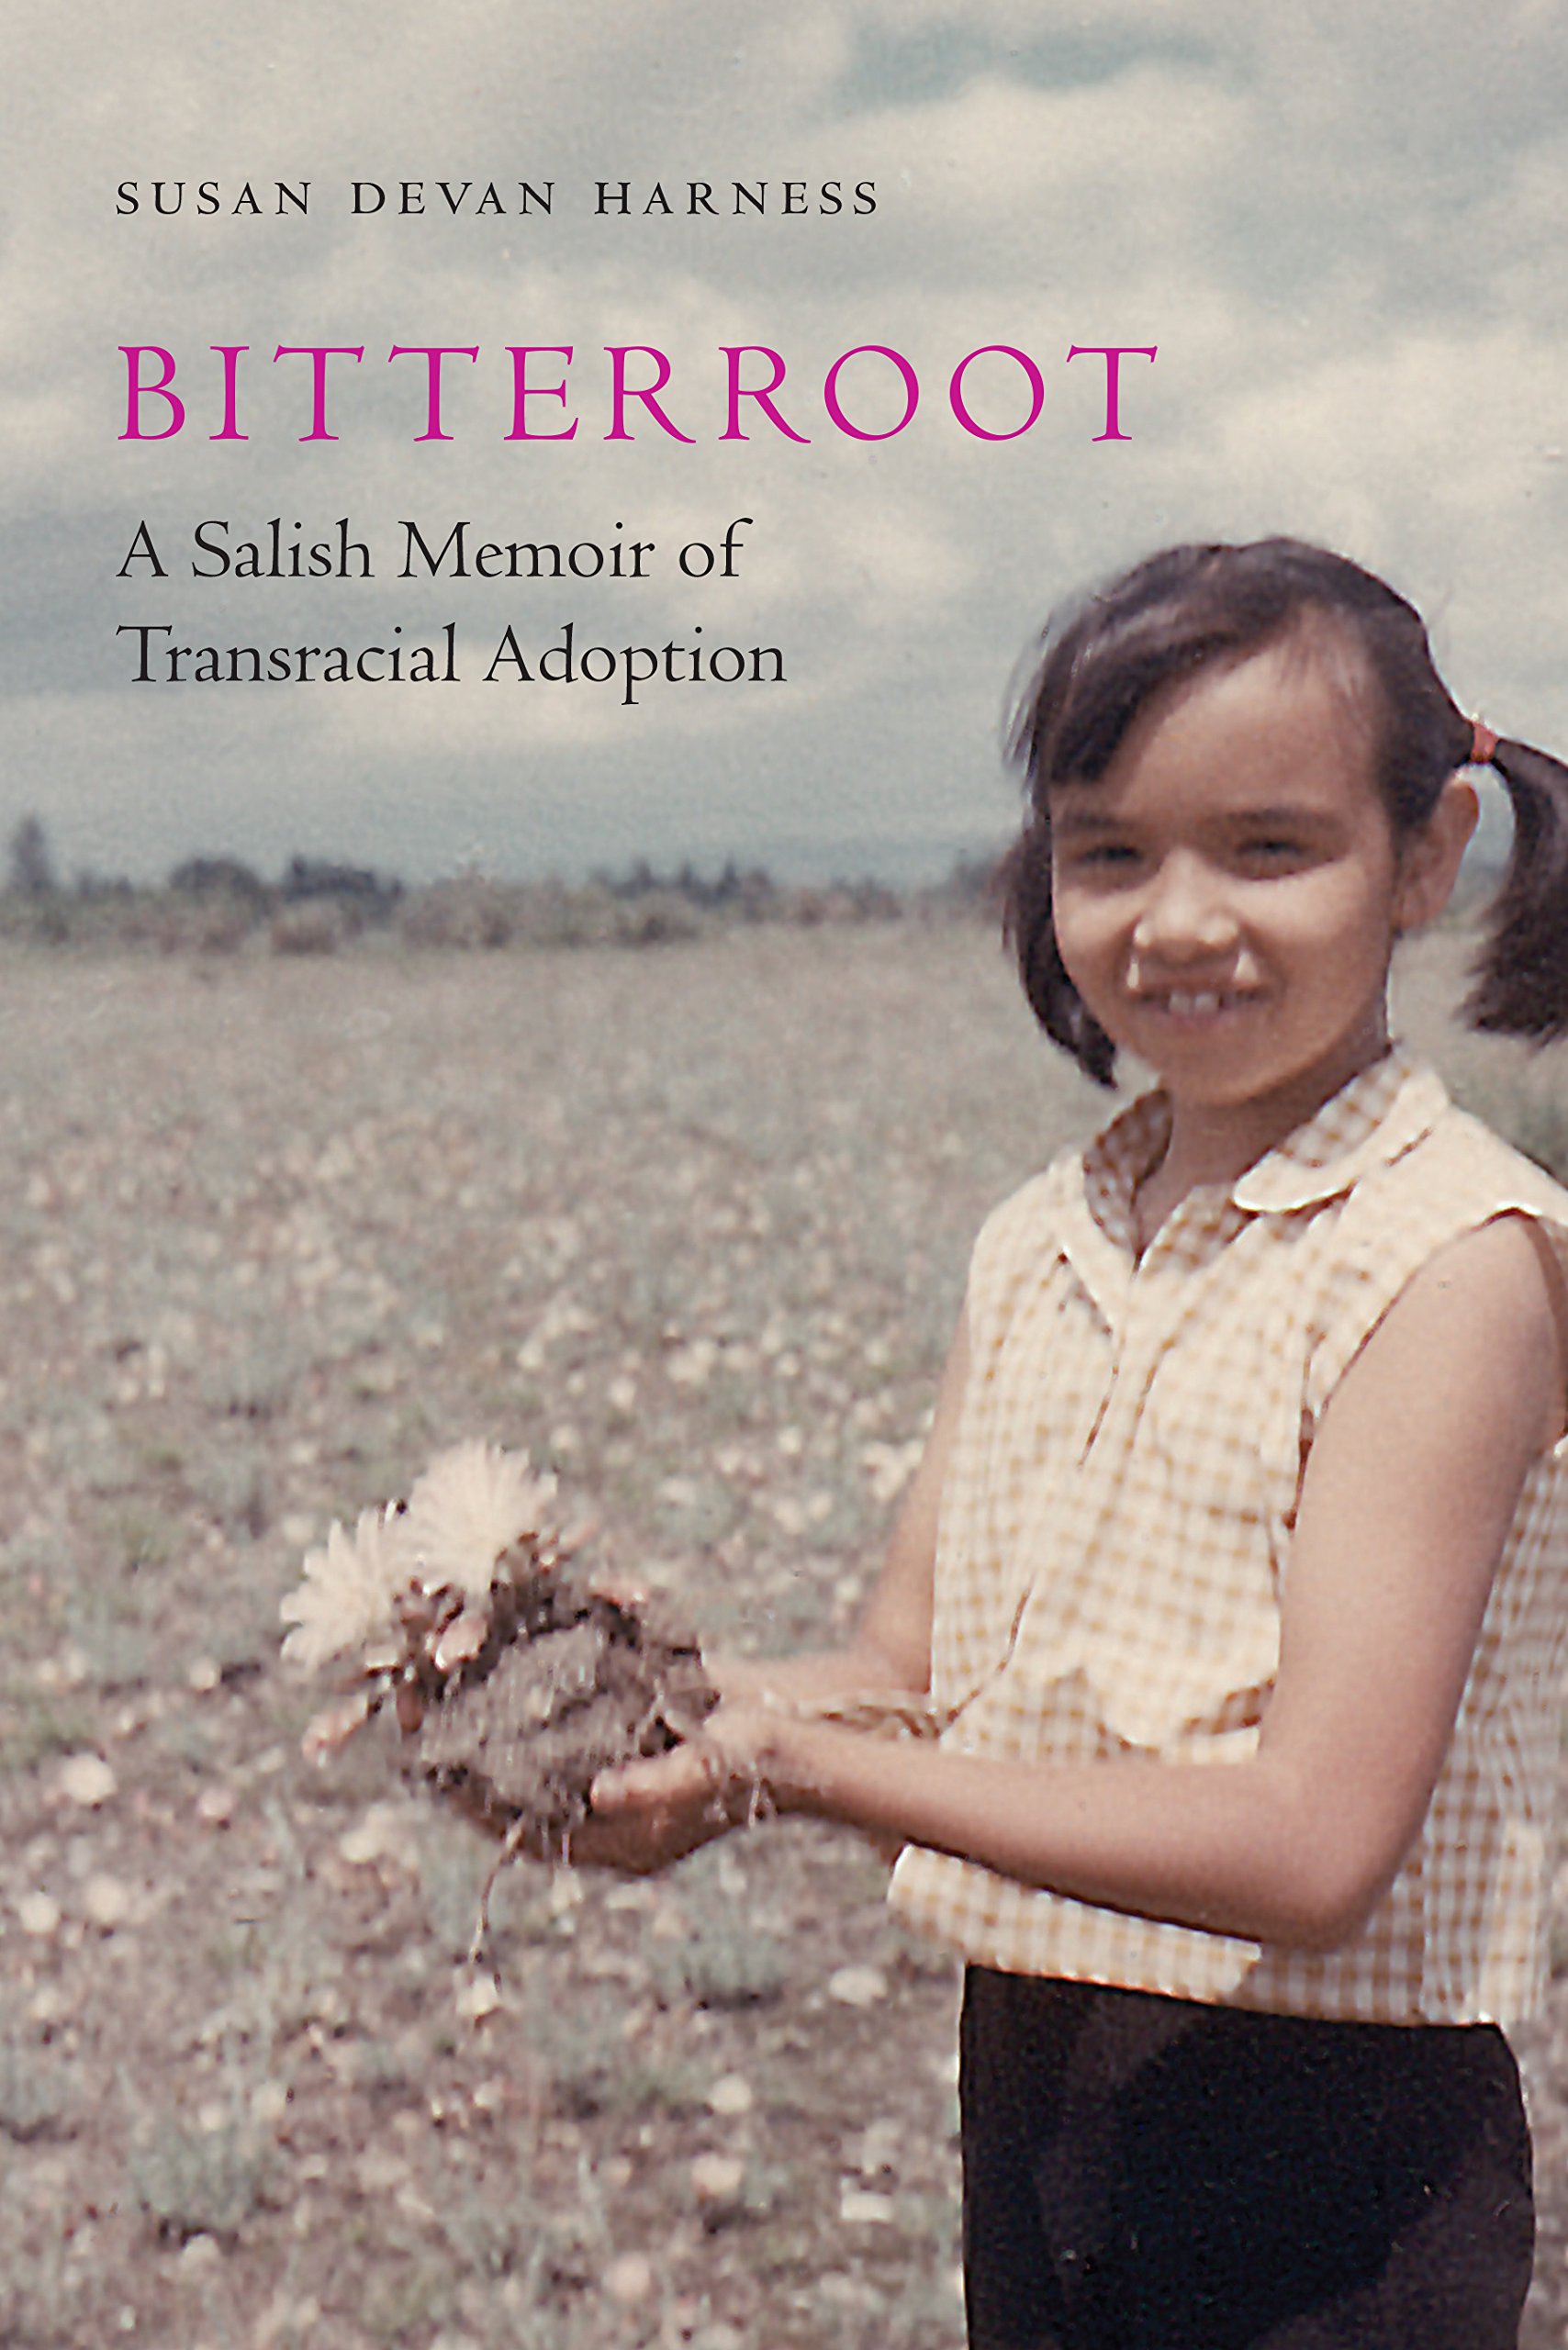 The cover of Bitterroot: A Salish Memoir of Transracial Adoption, by Susan Devan Harness, depicts a young girl holding flowers in a muddy field.